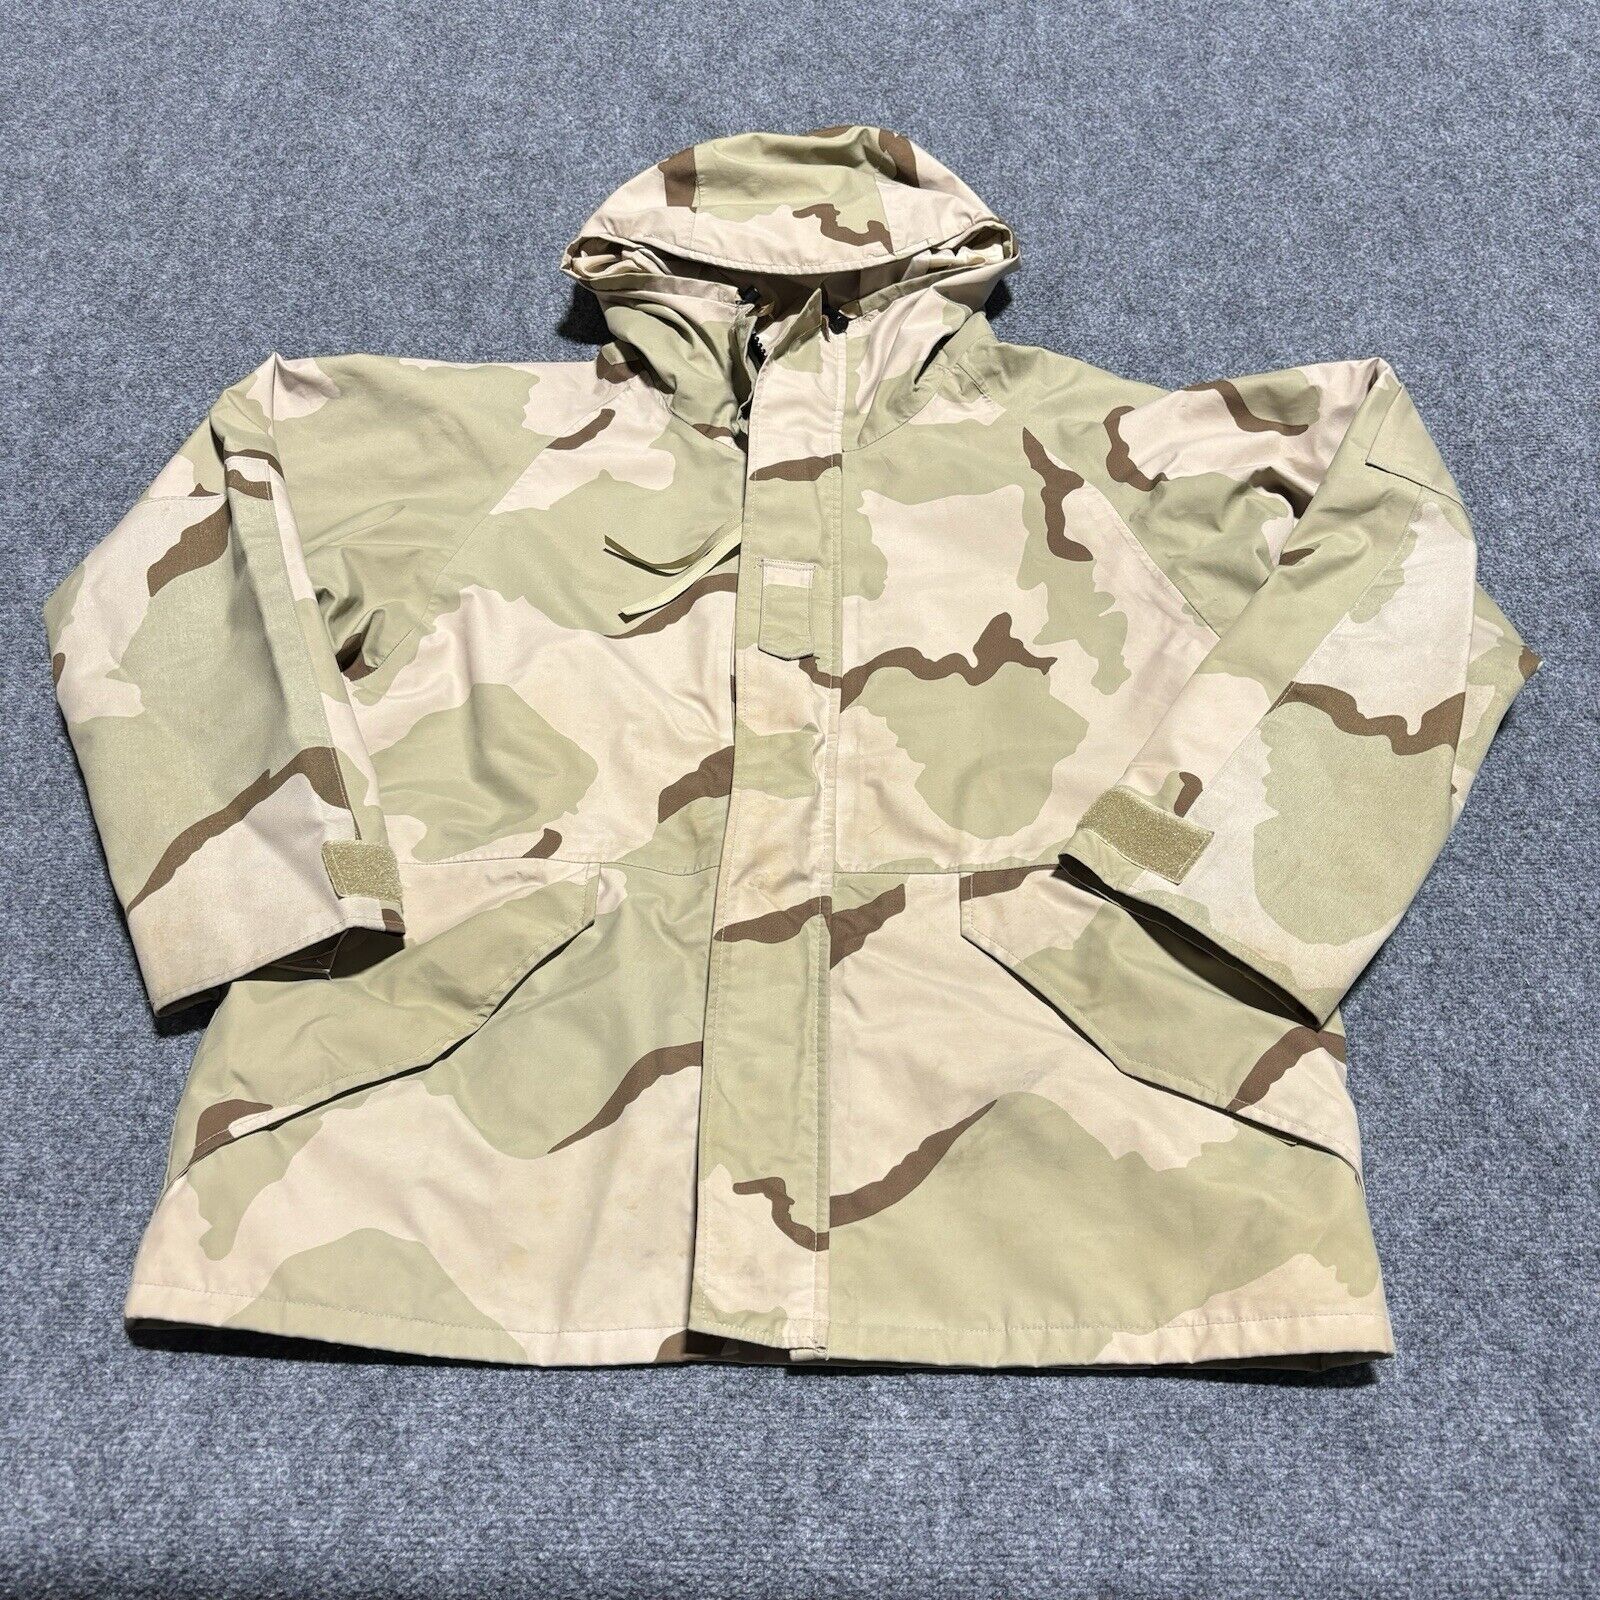 US Army Desert Cold Weather Parka Adult Large Regular Nylon Hooded Military FLAW